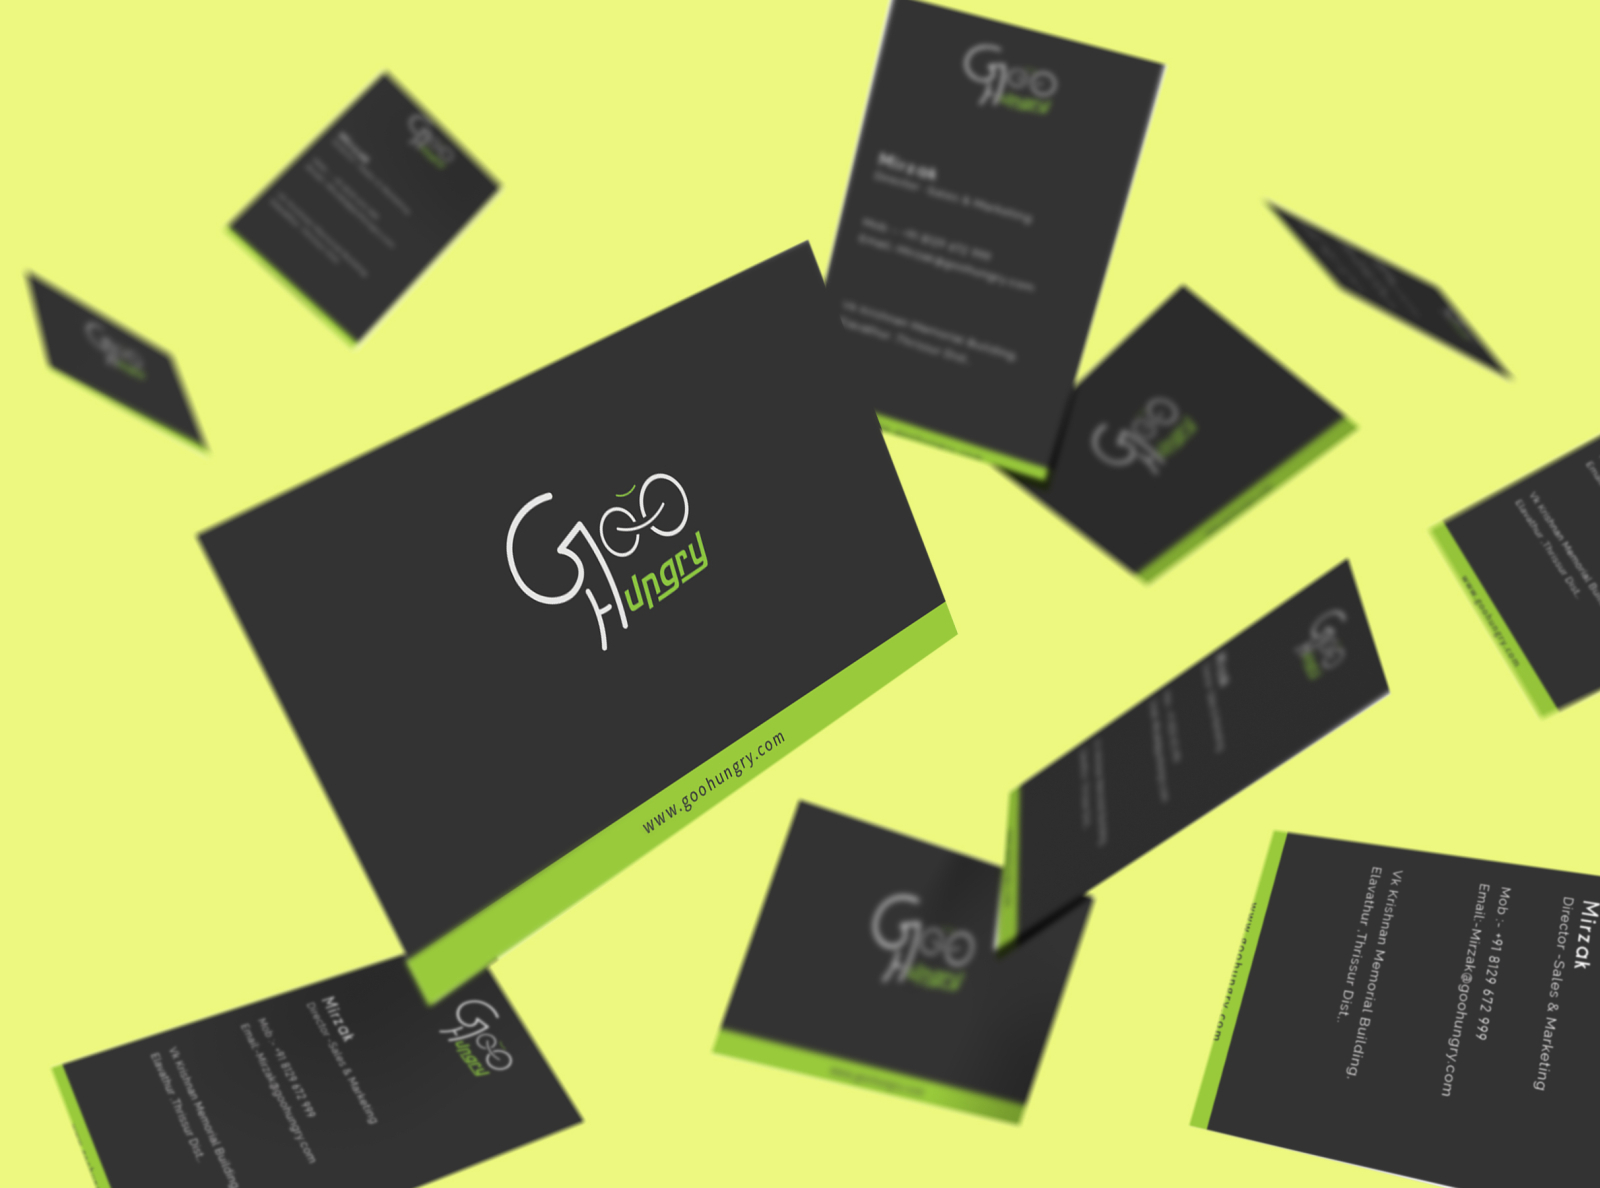 Download Business Card Mockup For Goohungry By Sidhanth Povil On Dribbble